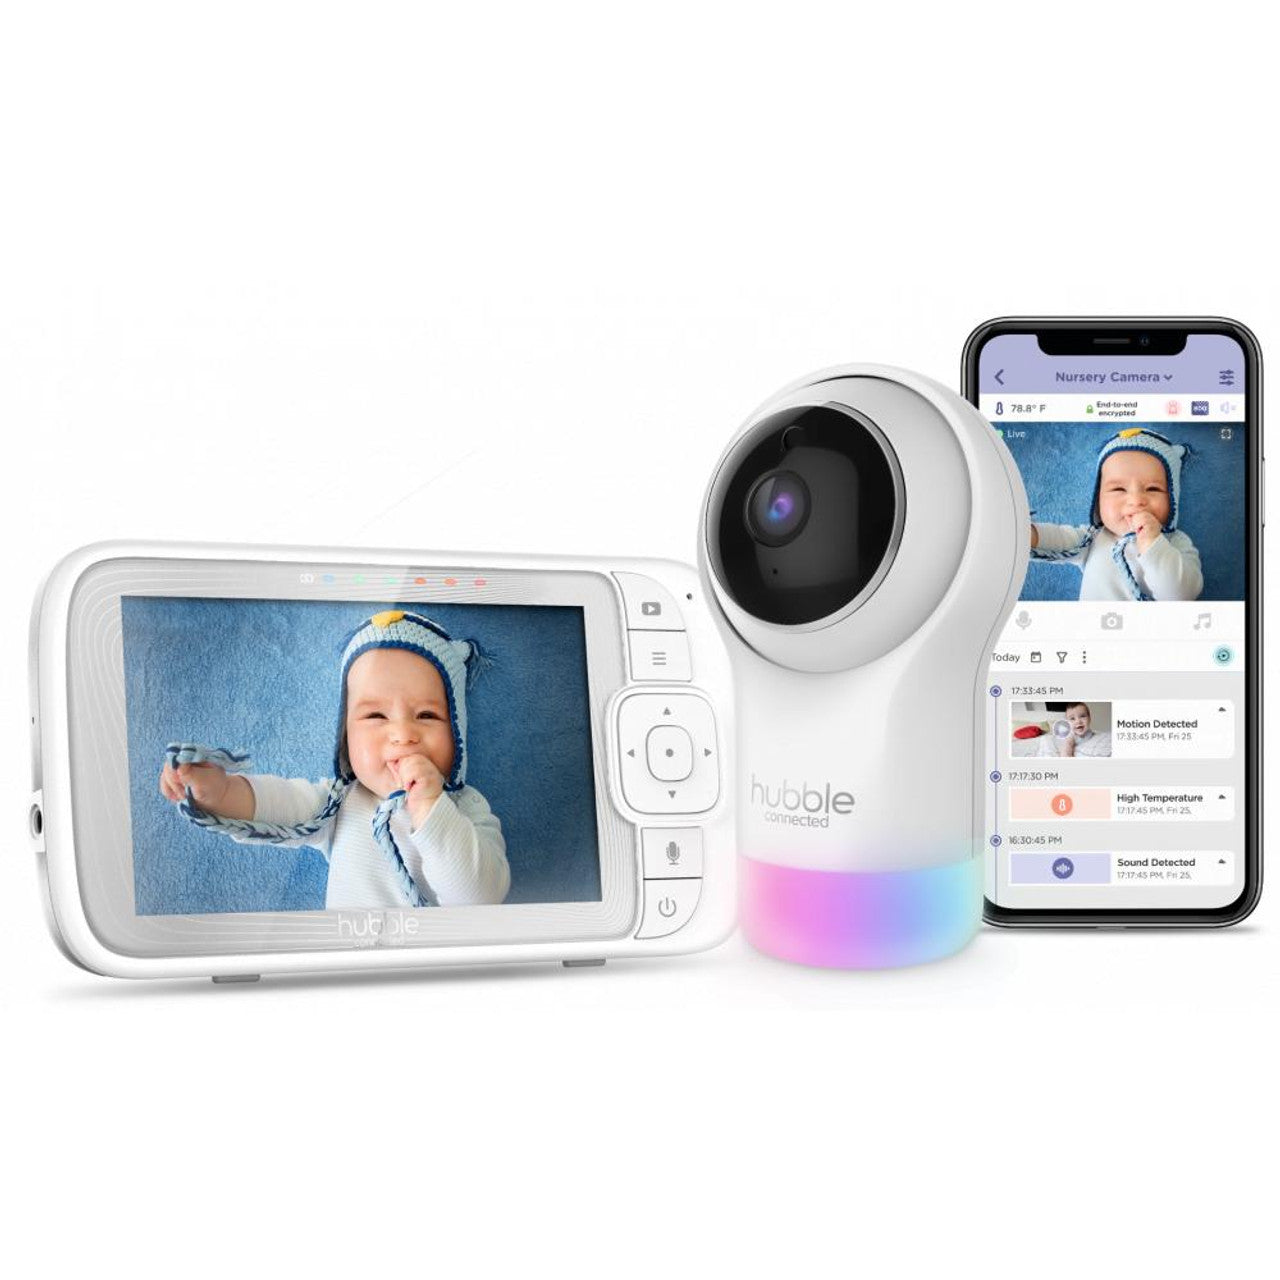 Hubble Nursery Pal Glow + 5" Baby Monitor | 5012786050273 from Hubble - DID Electrical